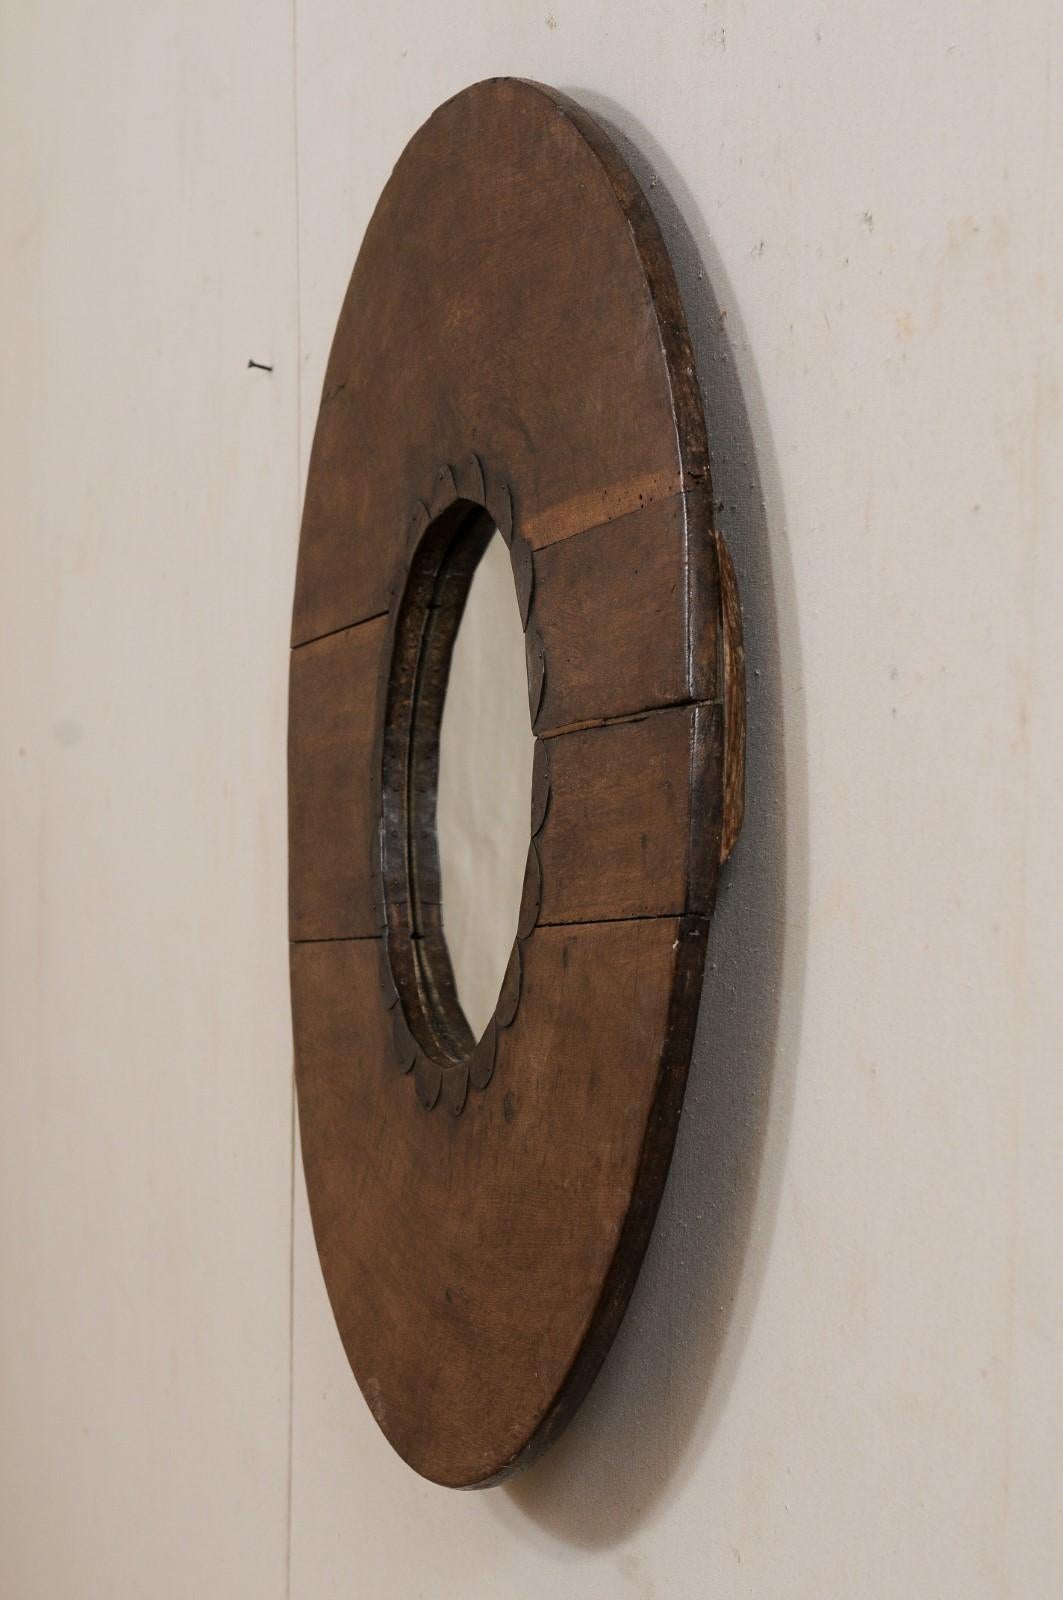 Unique Circular-Shaped Mirror from an Old Wooden N. African Cooking Utensil For Sale 2